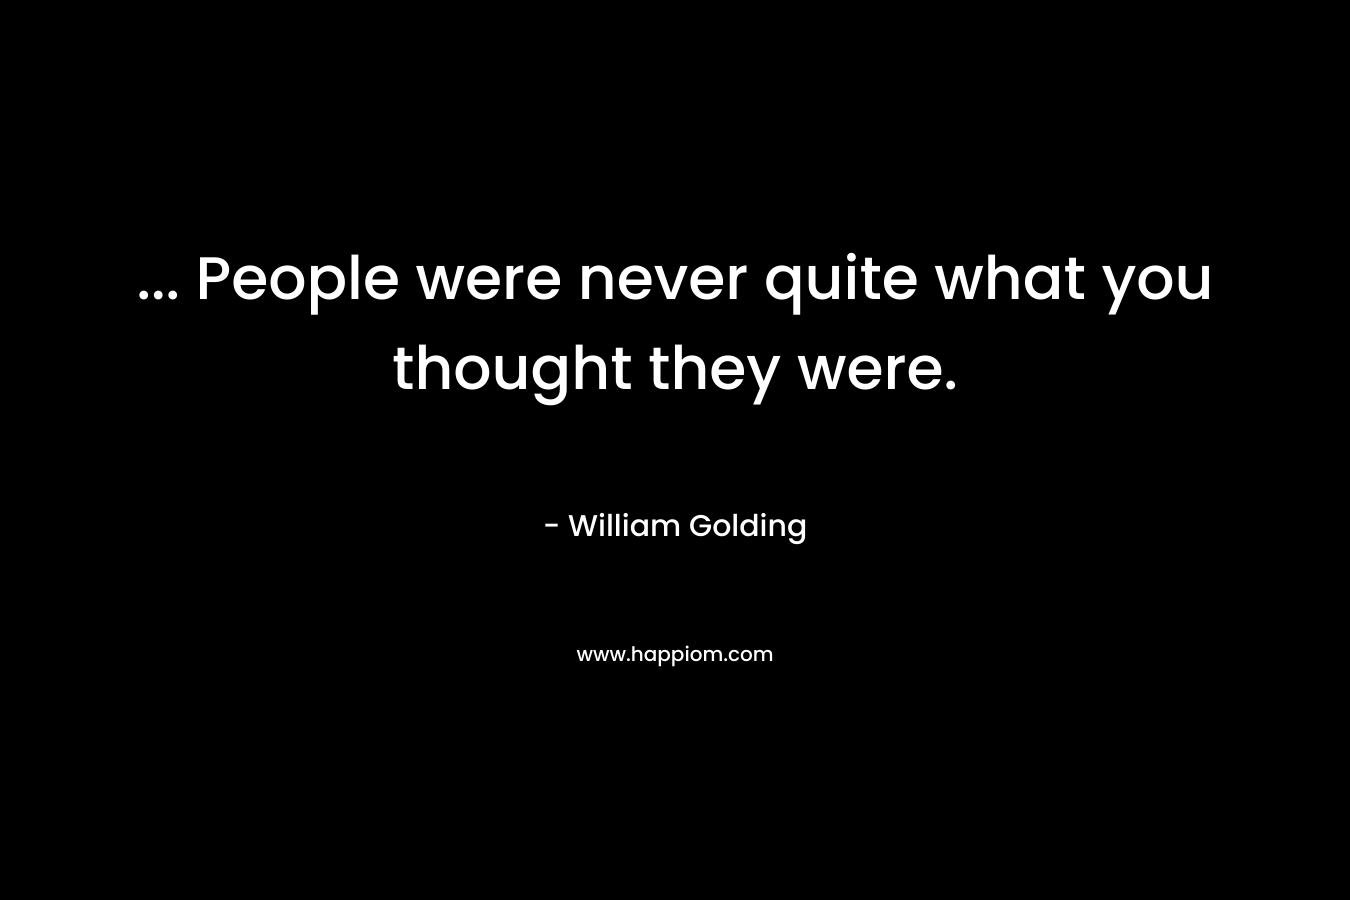 ... People were never quite what you thought they were.